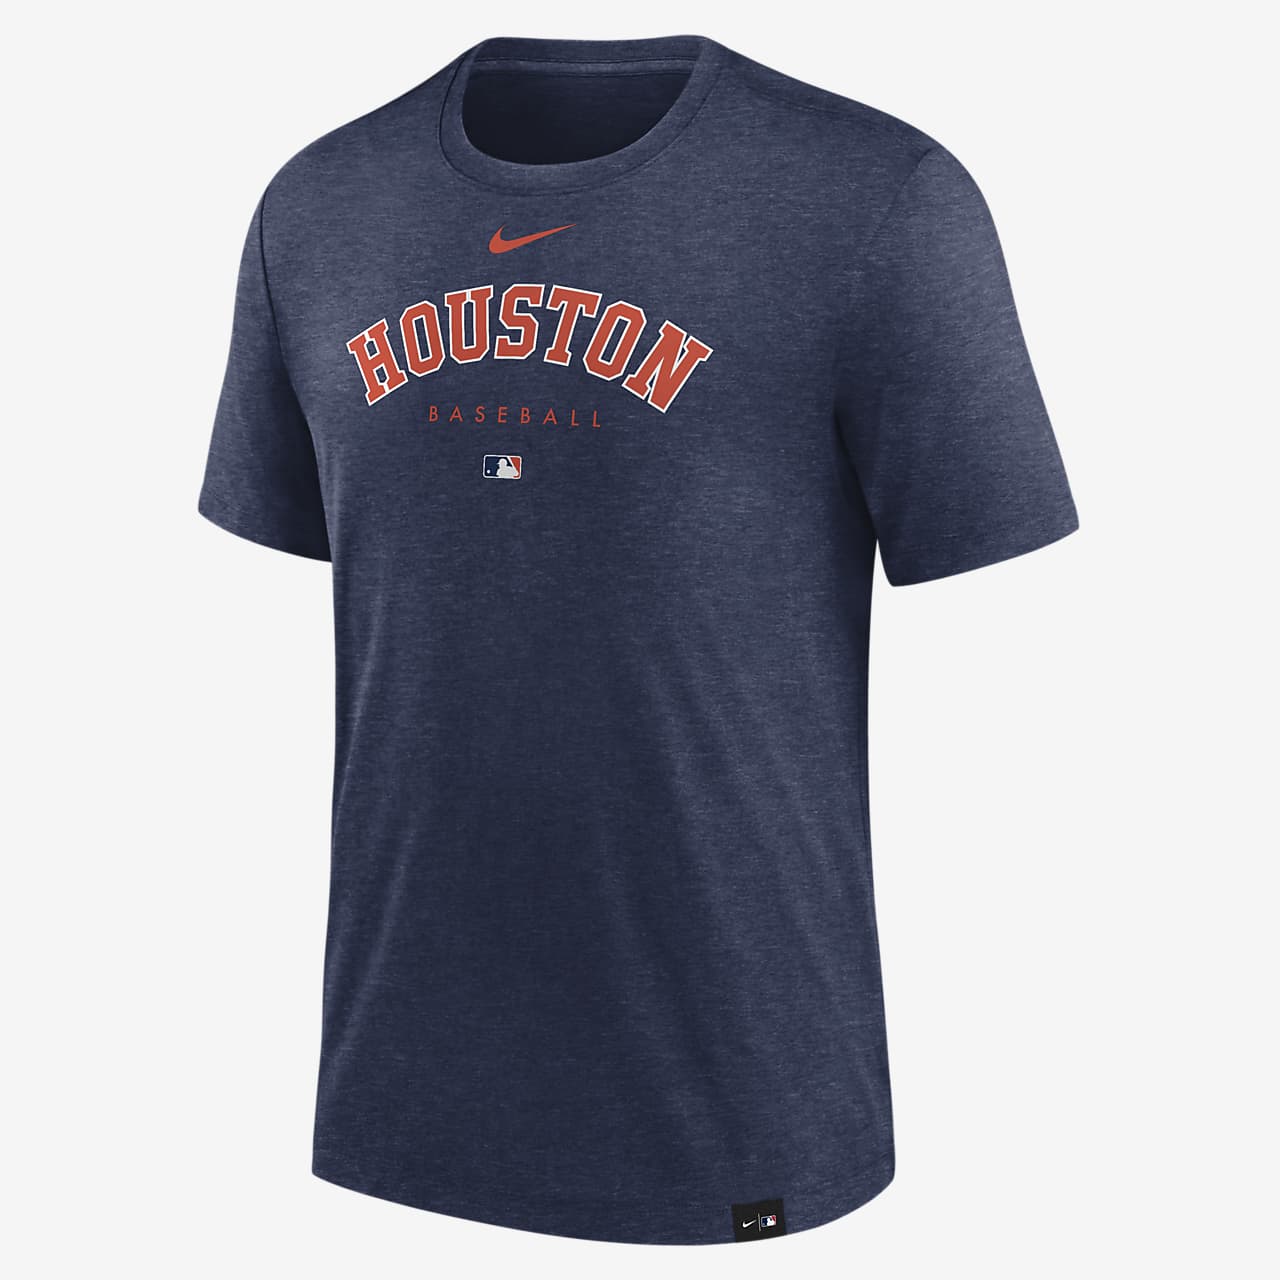 astros shirts on sale